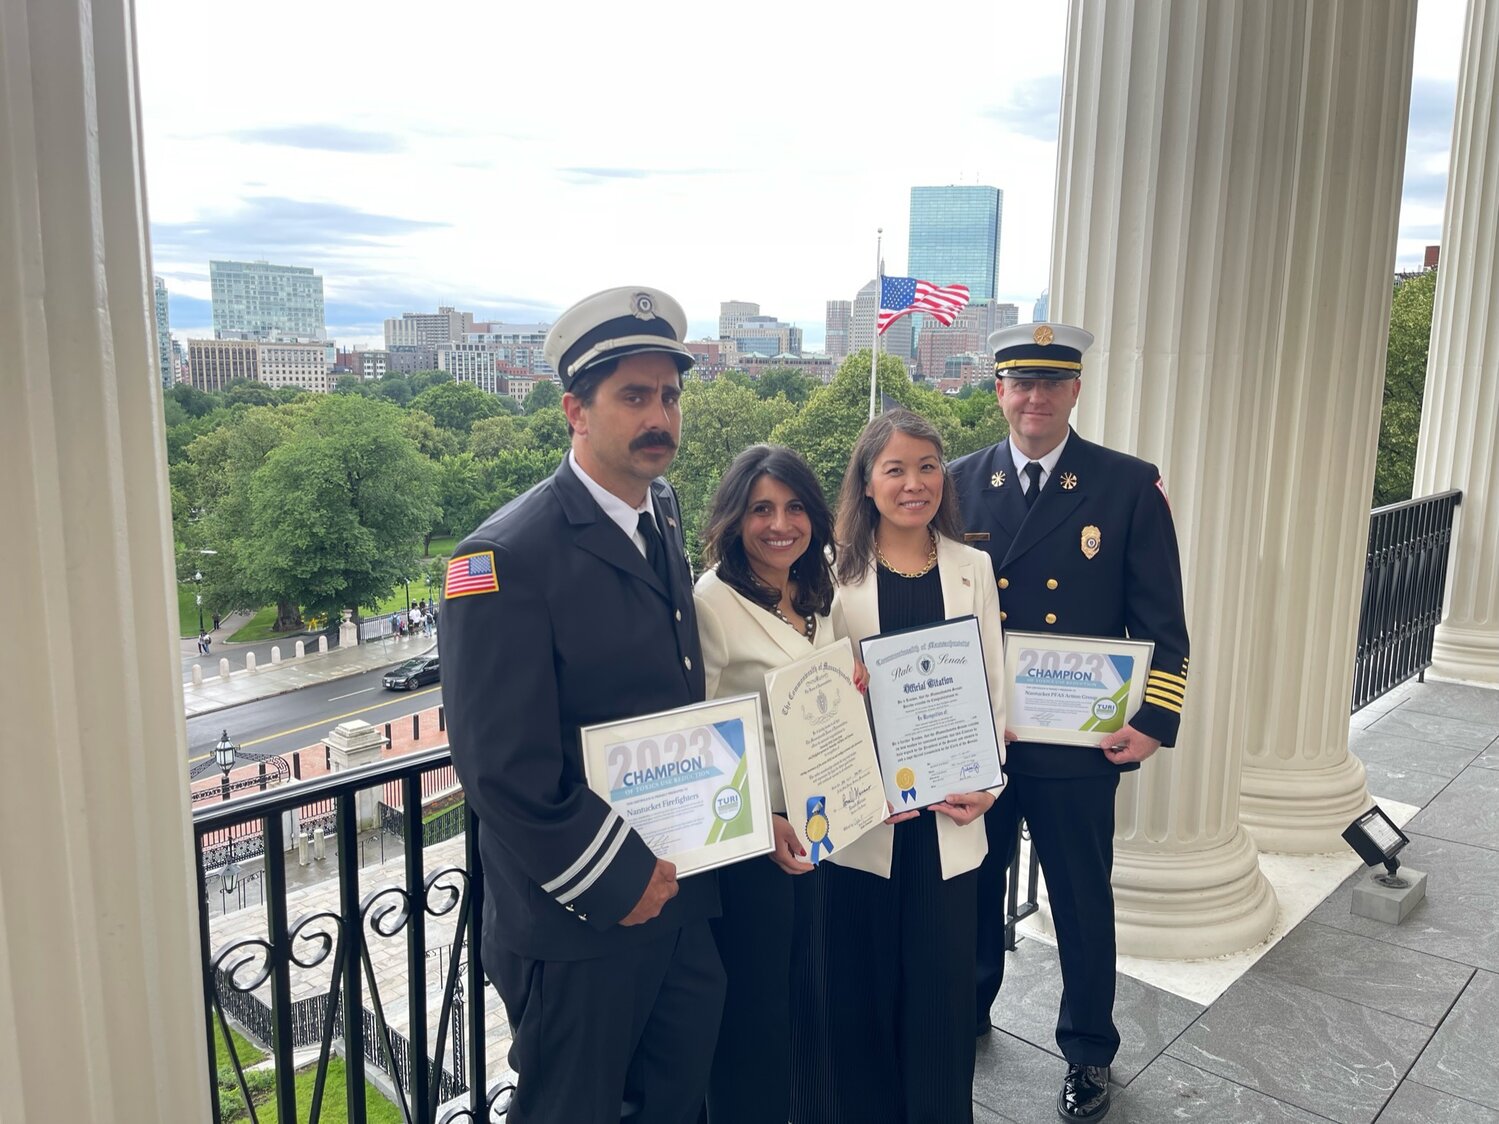 From left to right: NFD captain Nate Barber, Nantucket PFAS Action Group founders Ayesha Khan and Jamie Honkawa, and NFD deputy chief Sean Mitchell.